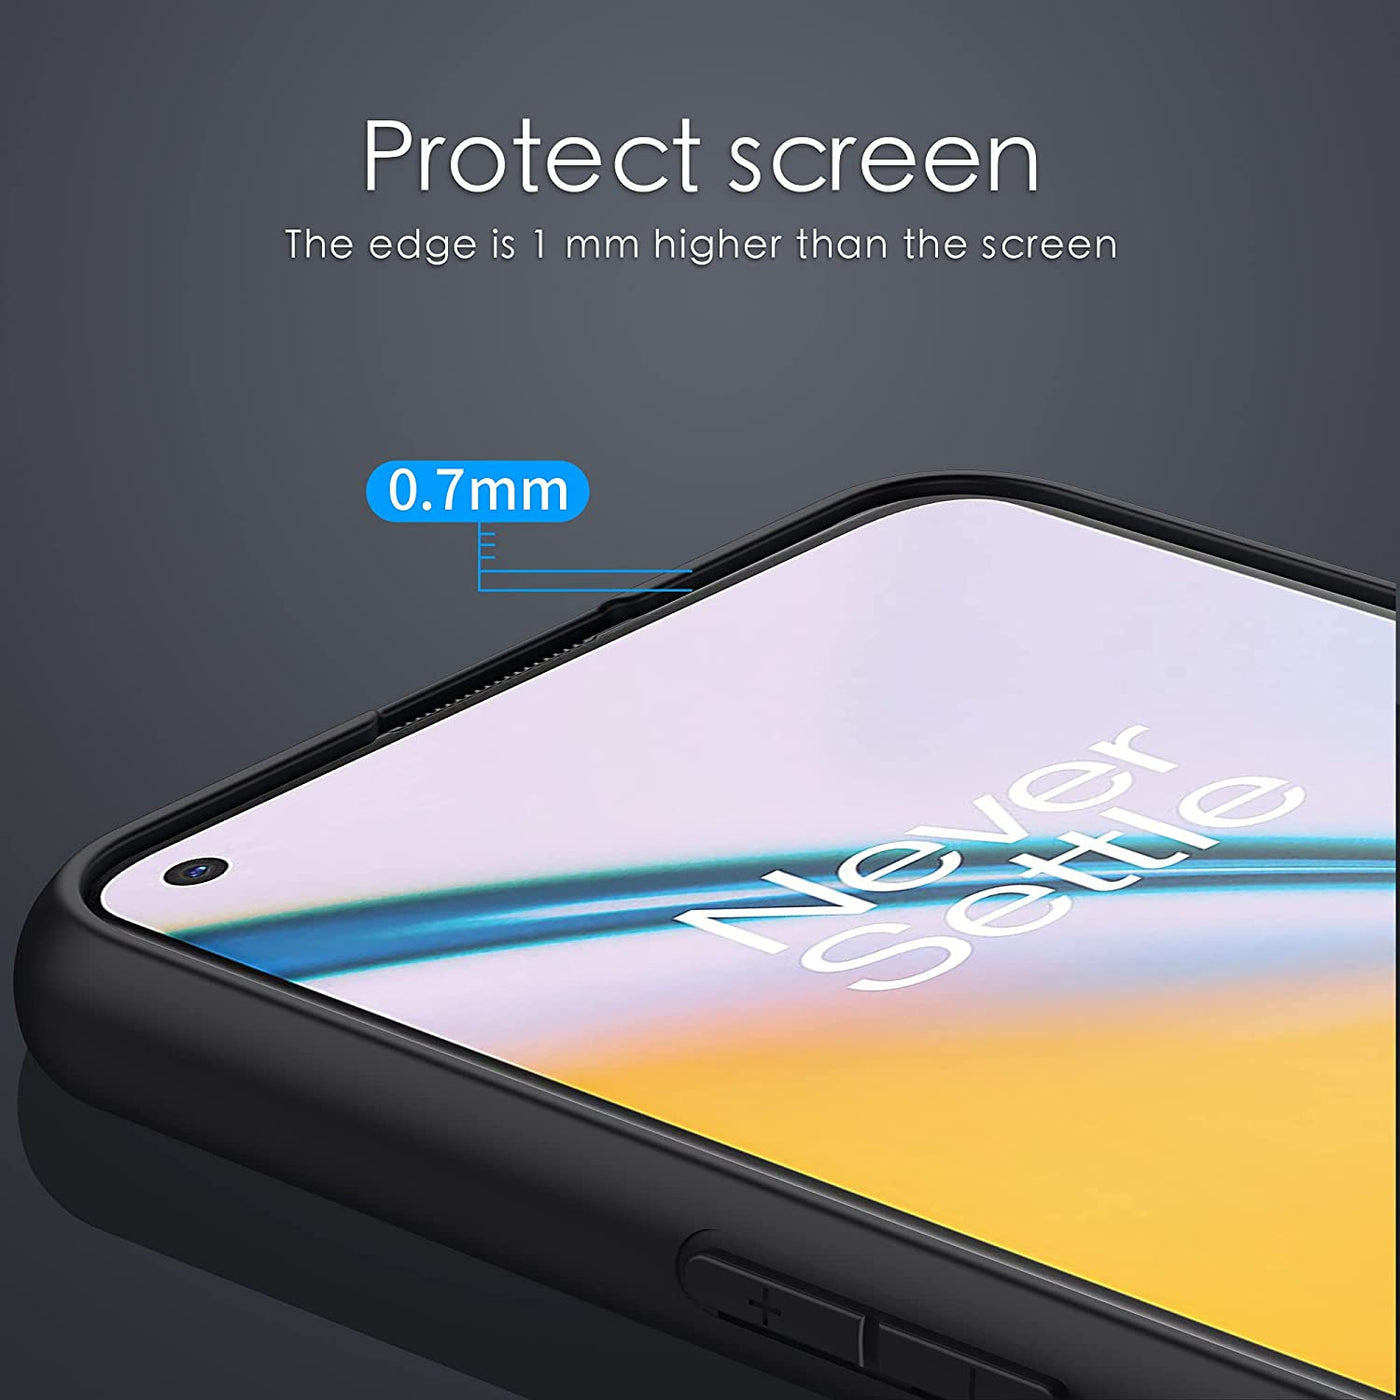 Oneplus Nord 2 raised edges to provide full protection